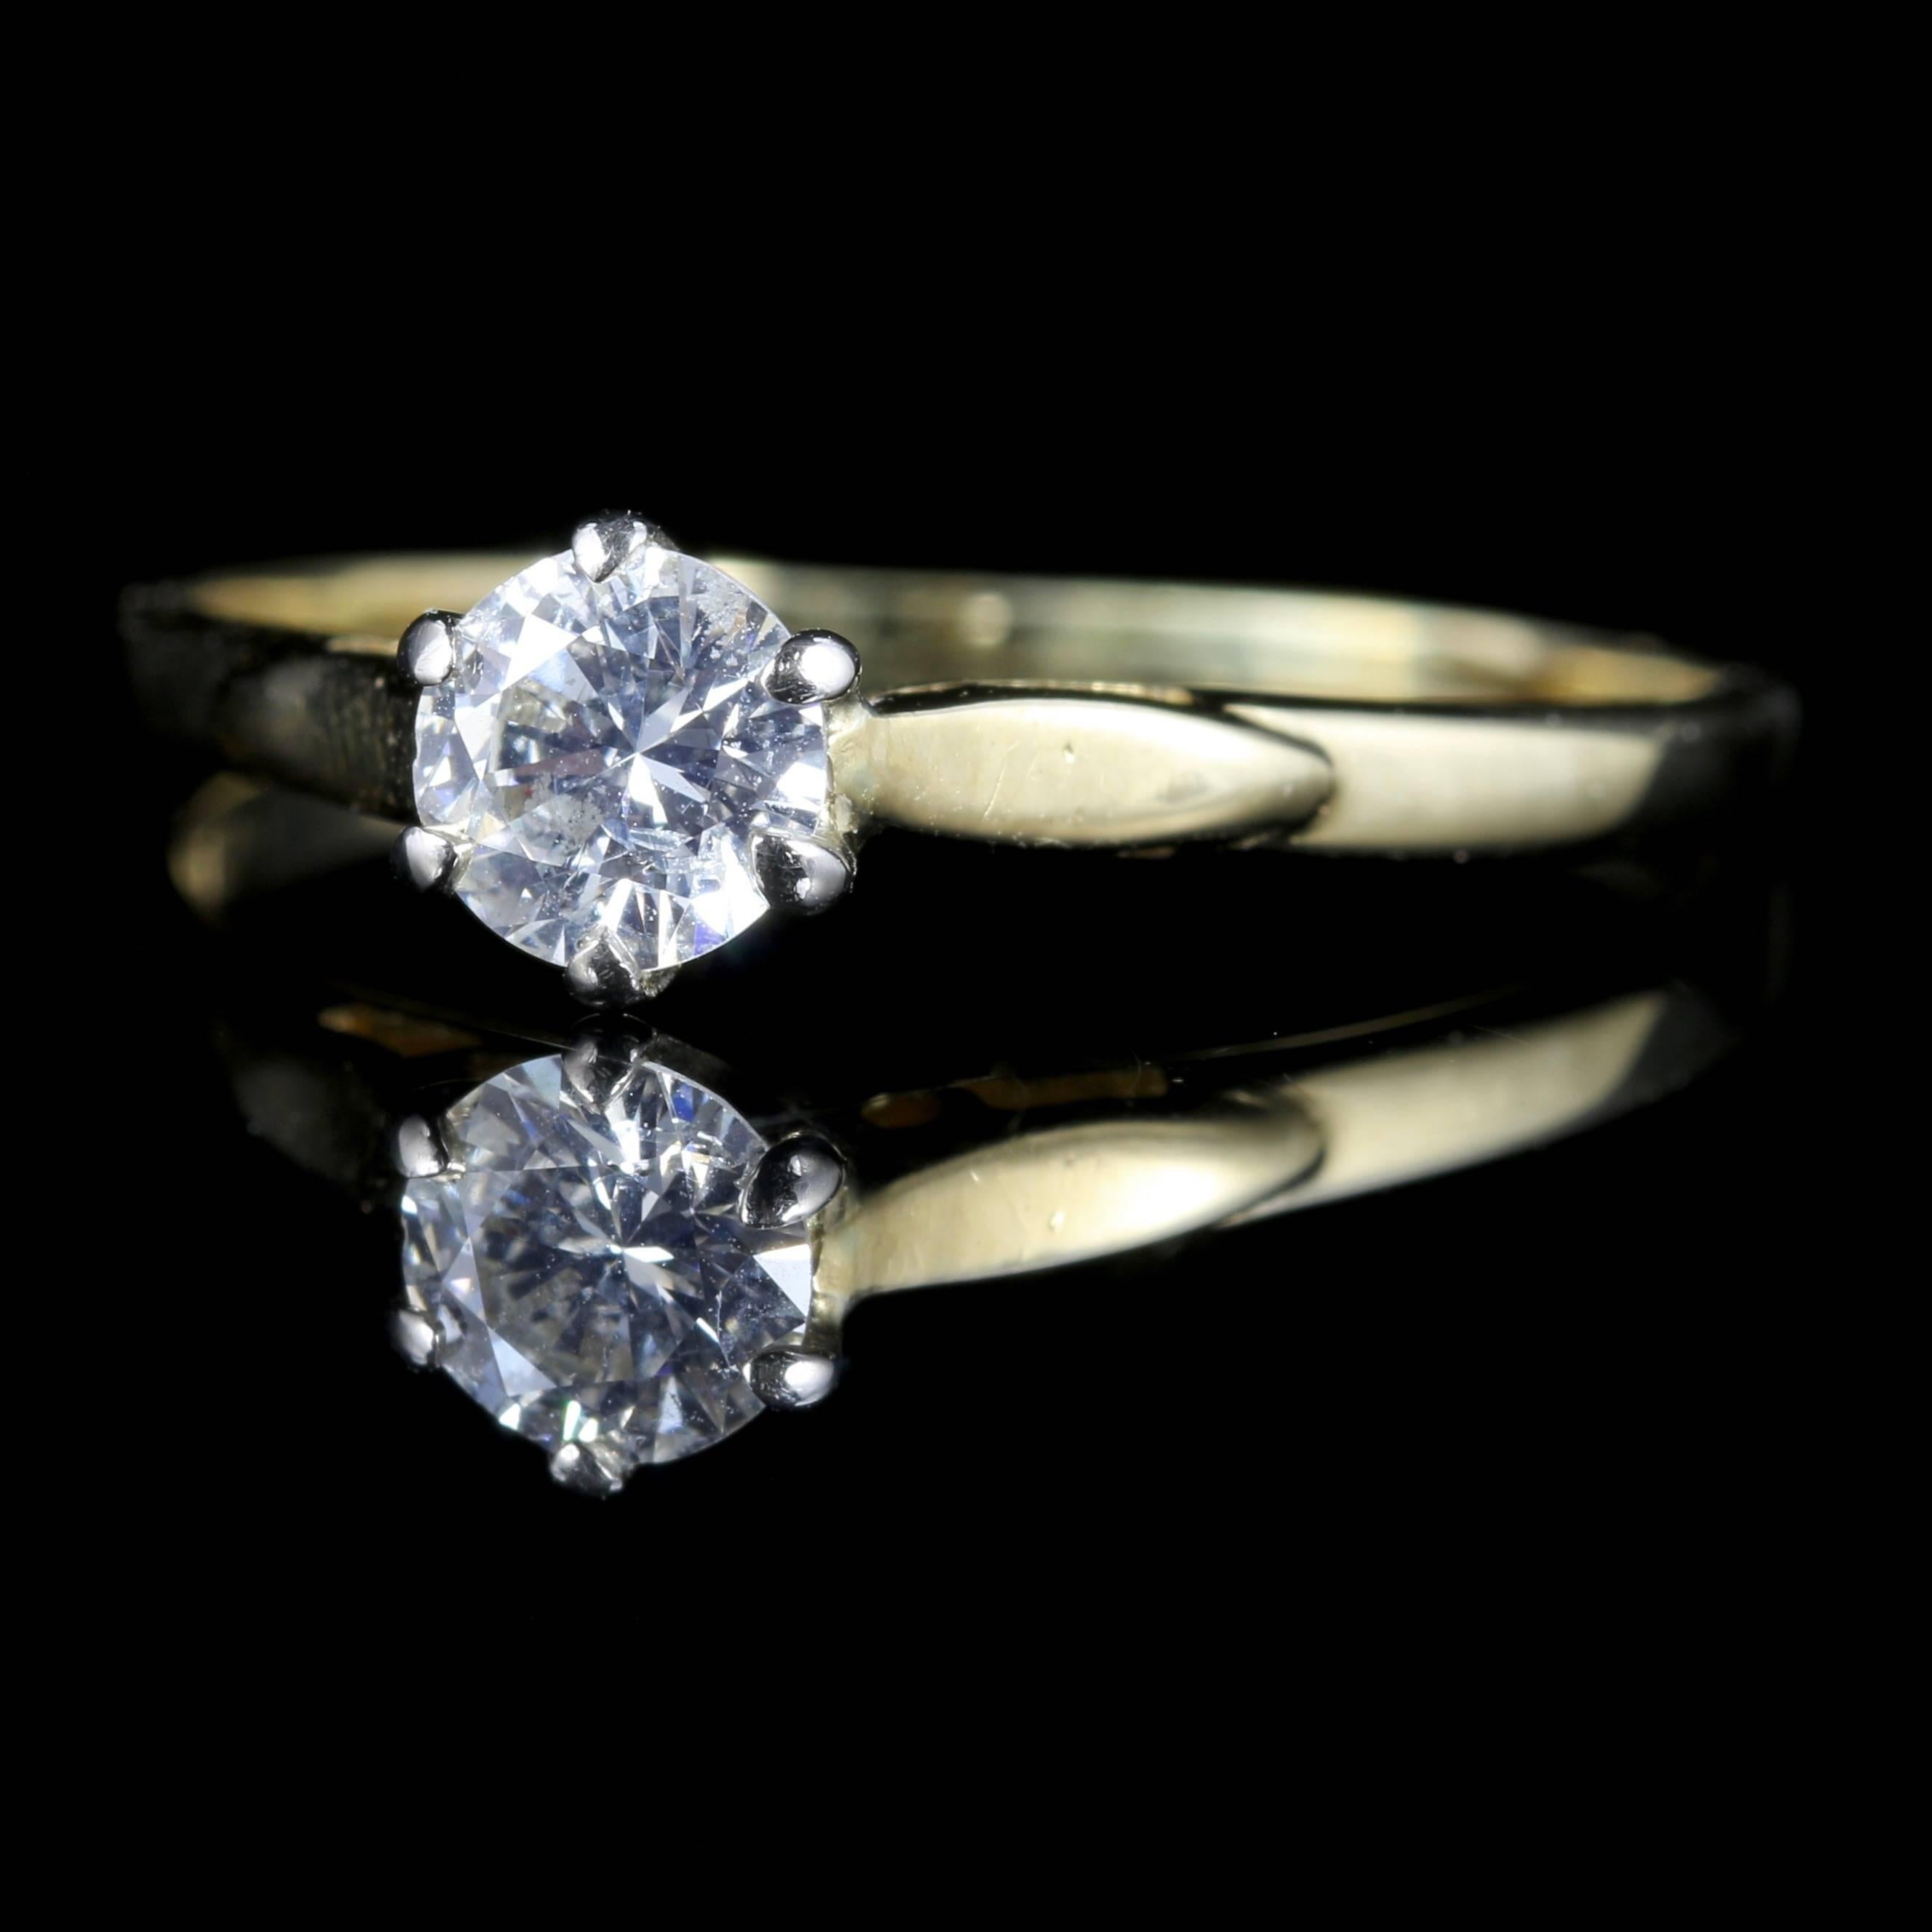 This stunning Antique 18ct yellow Gold Diamond solitaire ring is genuine Victorian.

Circa 1900 a lovely Antique Victorian Diamond ring.

This ring has been dated as a later date in London 

Stamped 750 for 18ct Gold

This lovely ring is set with a